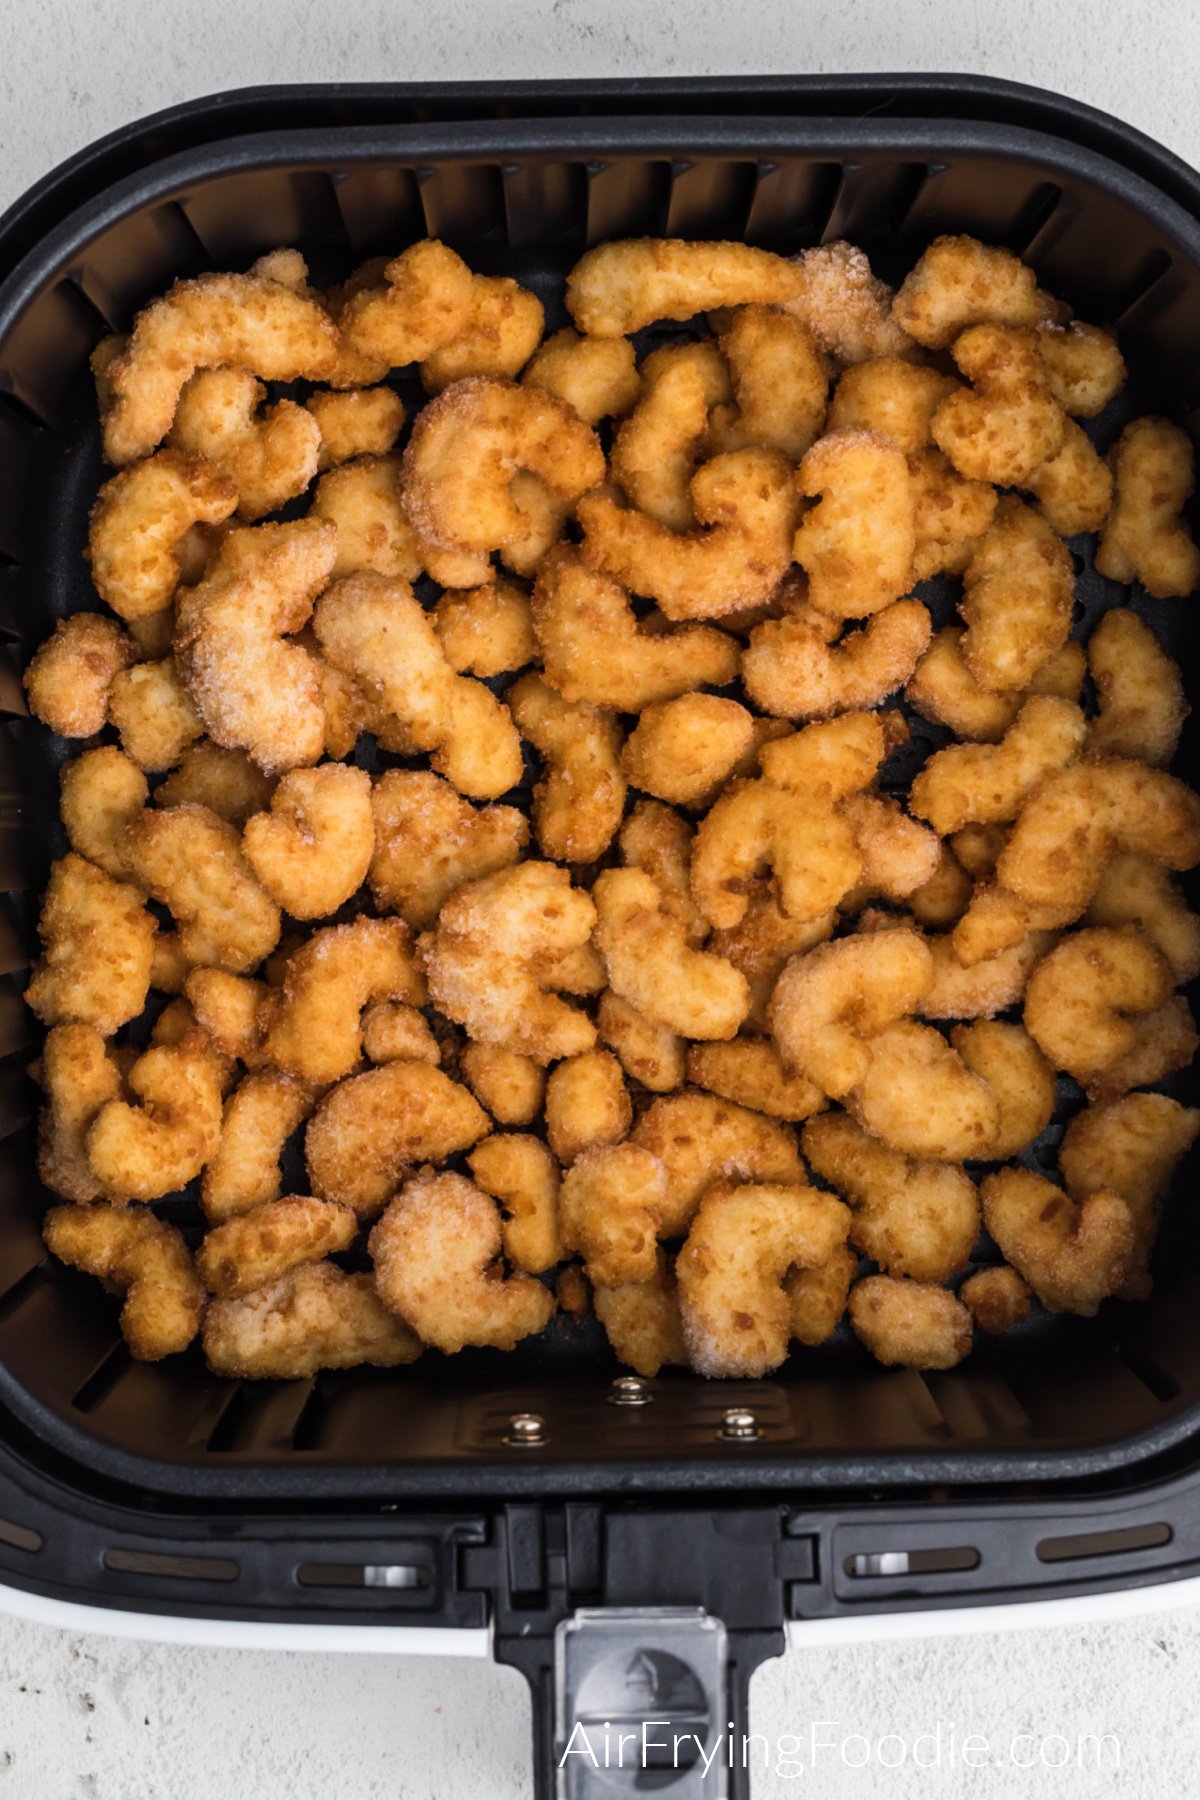 Frozen popcorn shrimp in air fryer basket, ready to be air fried.